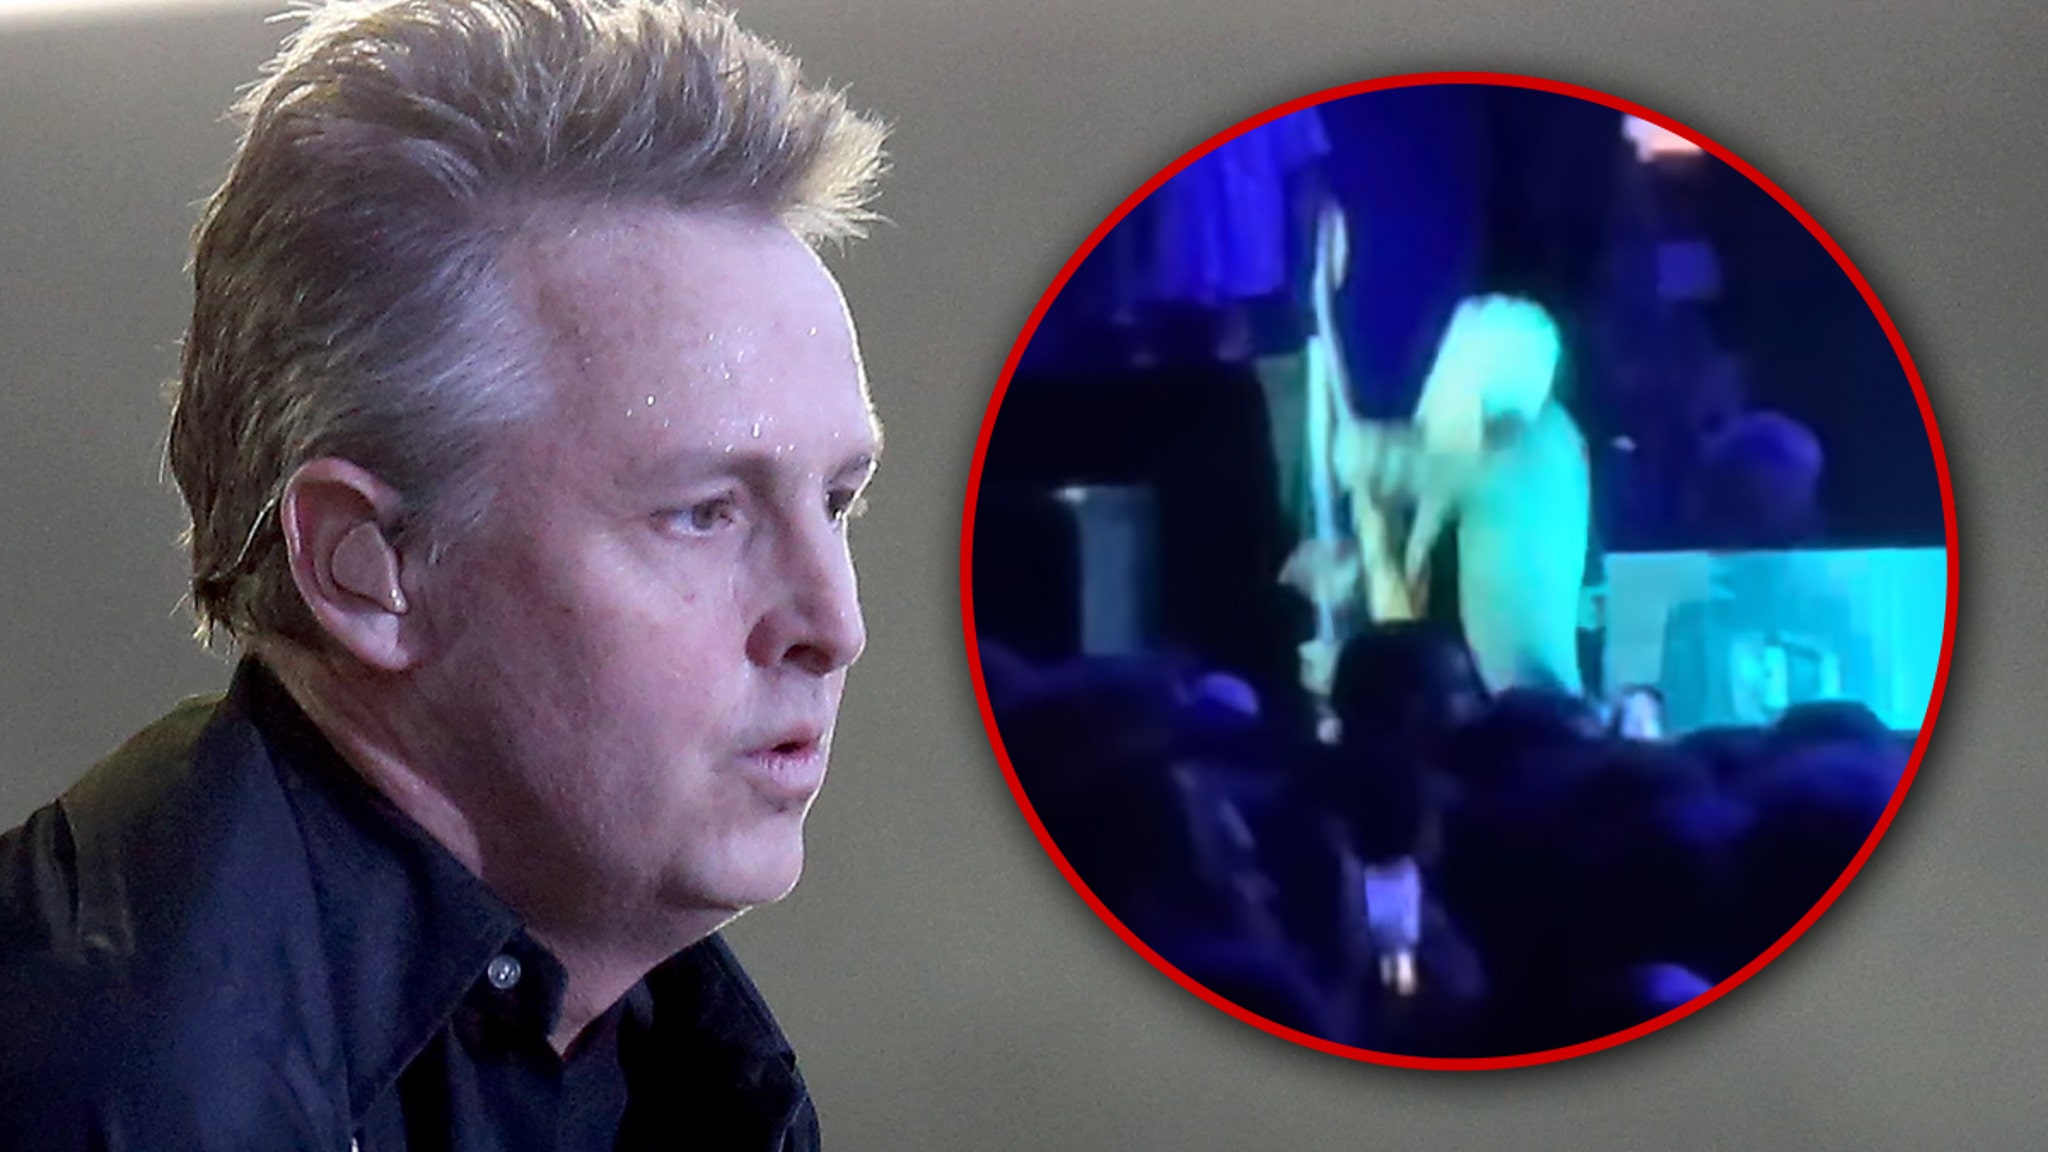 Pearl Jam Guitarist Mike McCready Falls Hard Offstage During Guitar Solo